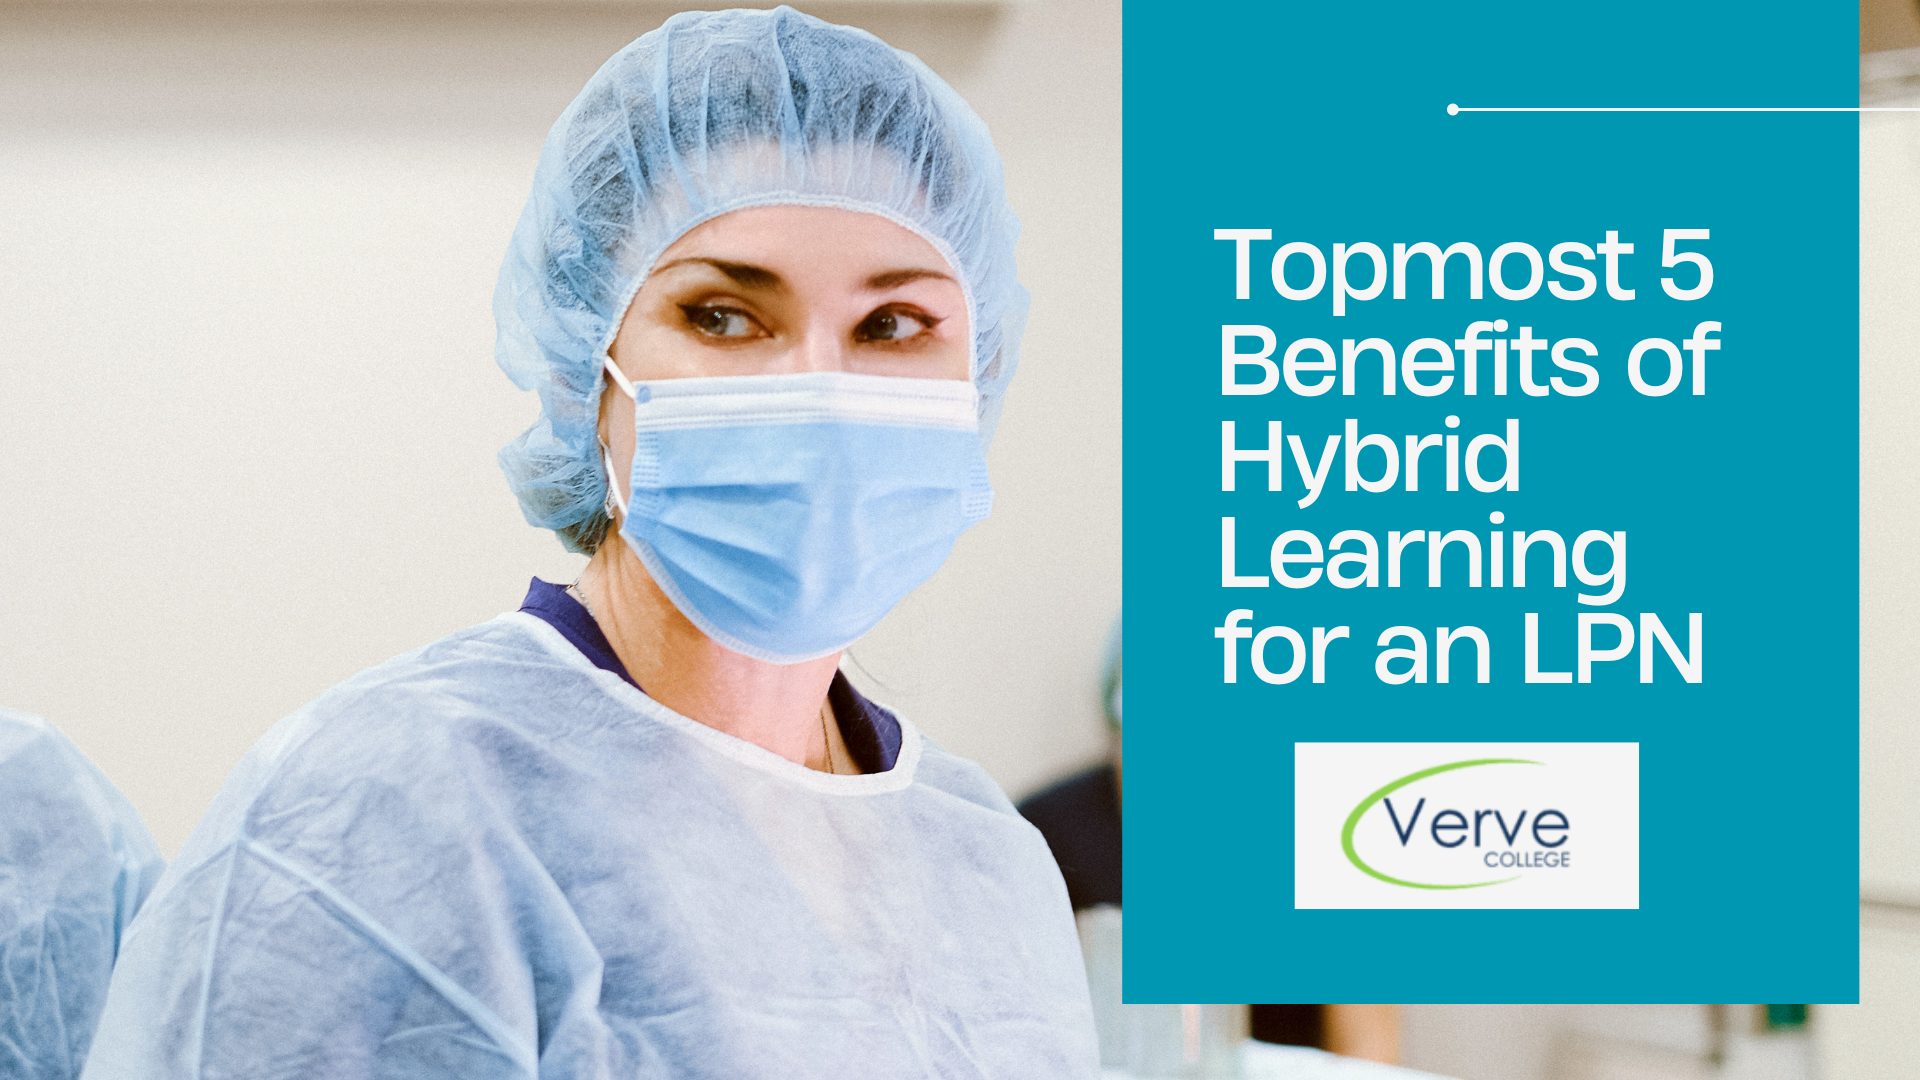 Topmost 5 Benefits of Hybrid Learning For an LPN